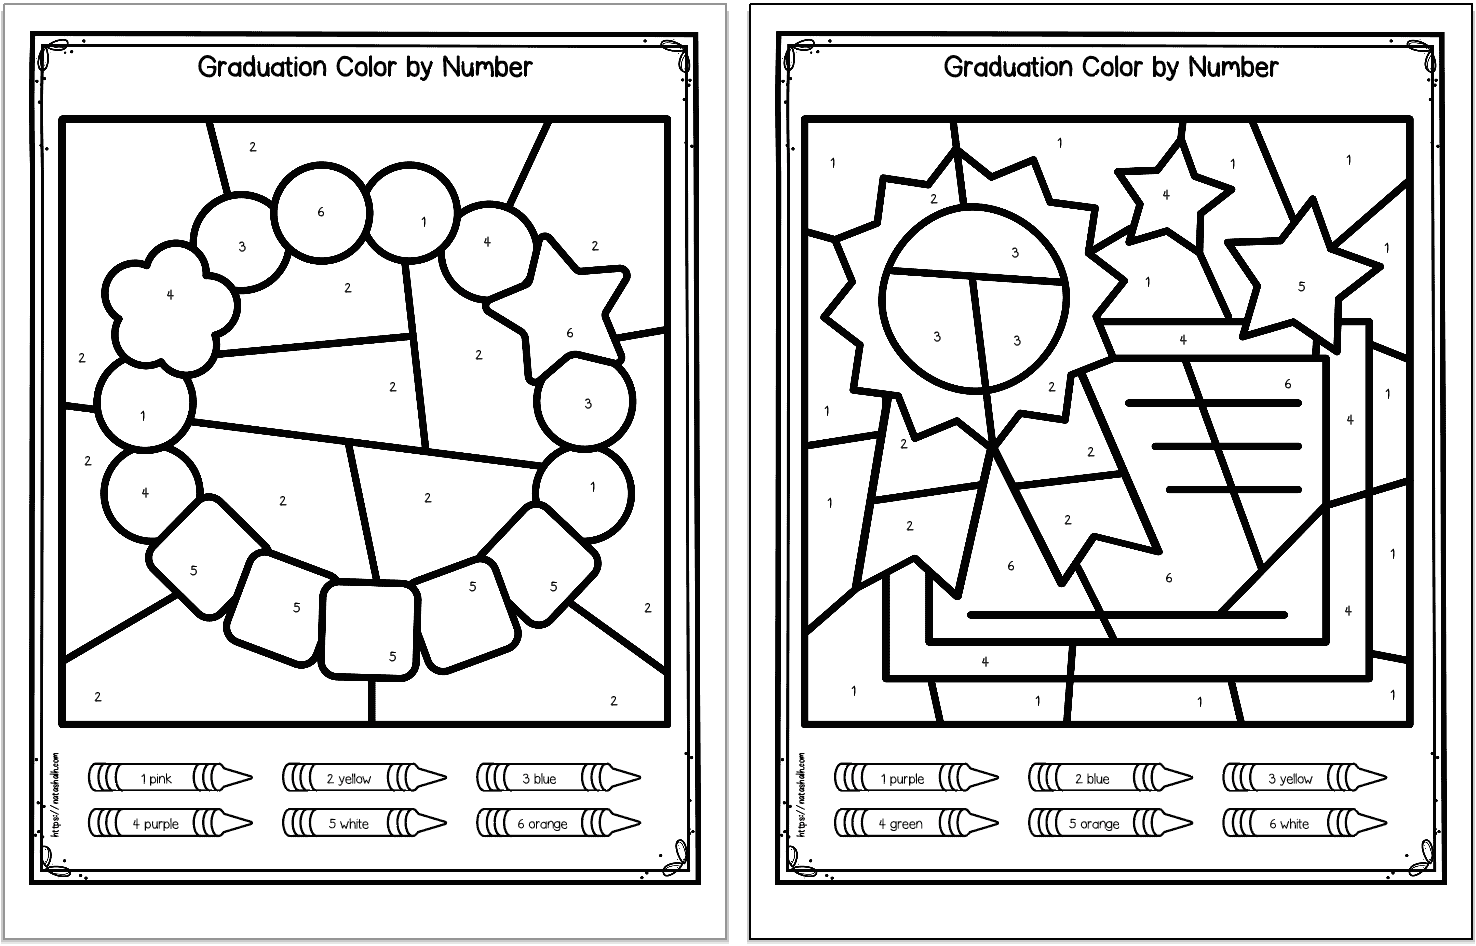 Two color by number pages. One shows a friendship bracelet and the other a ribbon and certificate. 